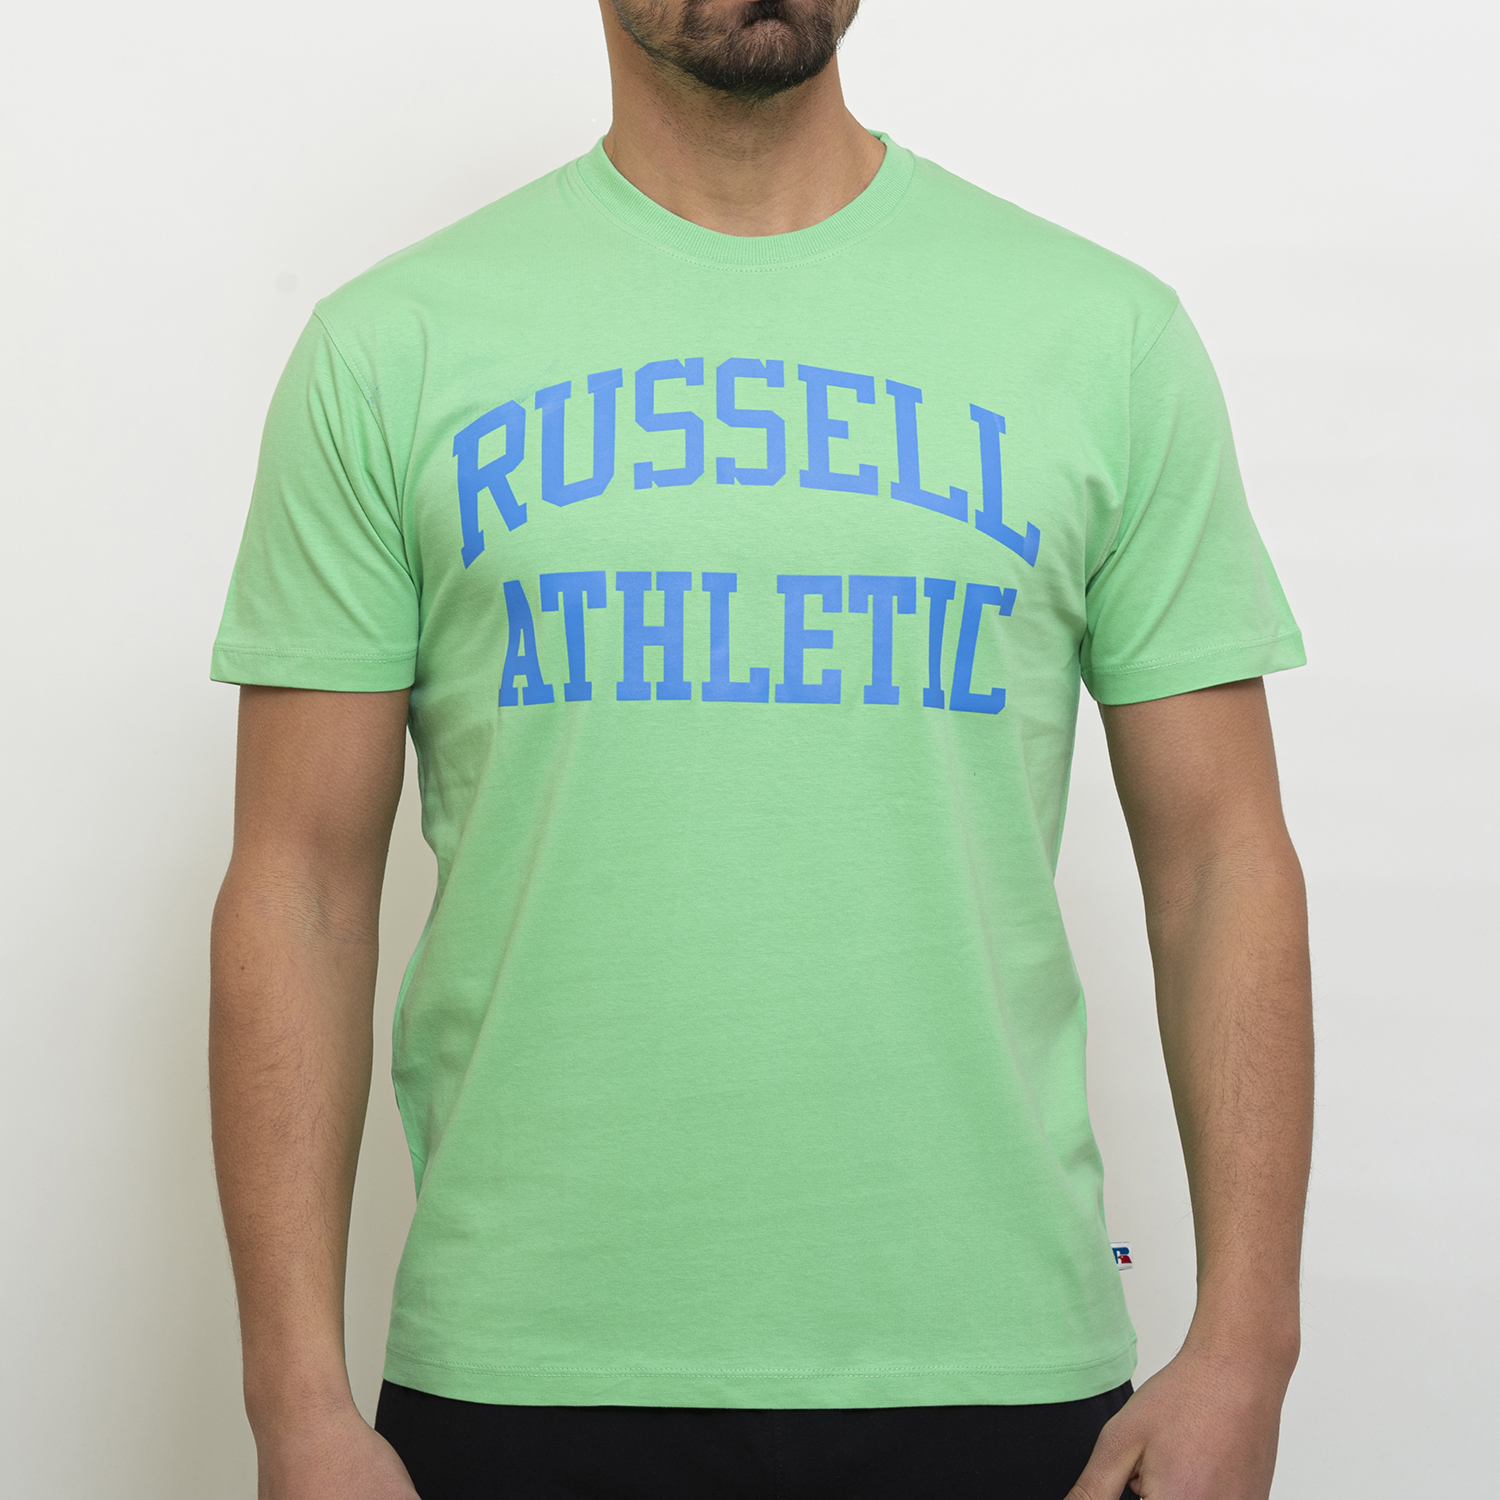 Russell Athletic - ICONIC S/S CREWNECK TEE SHIRT - ABSINTHE GREEN